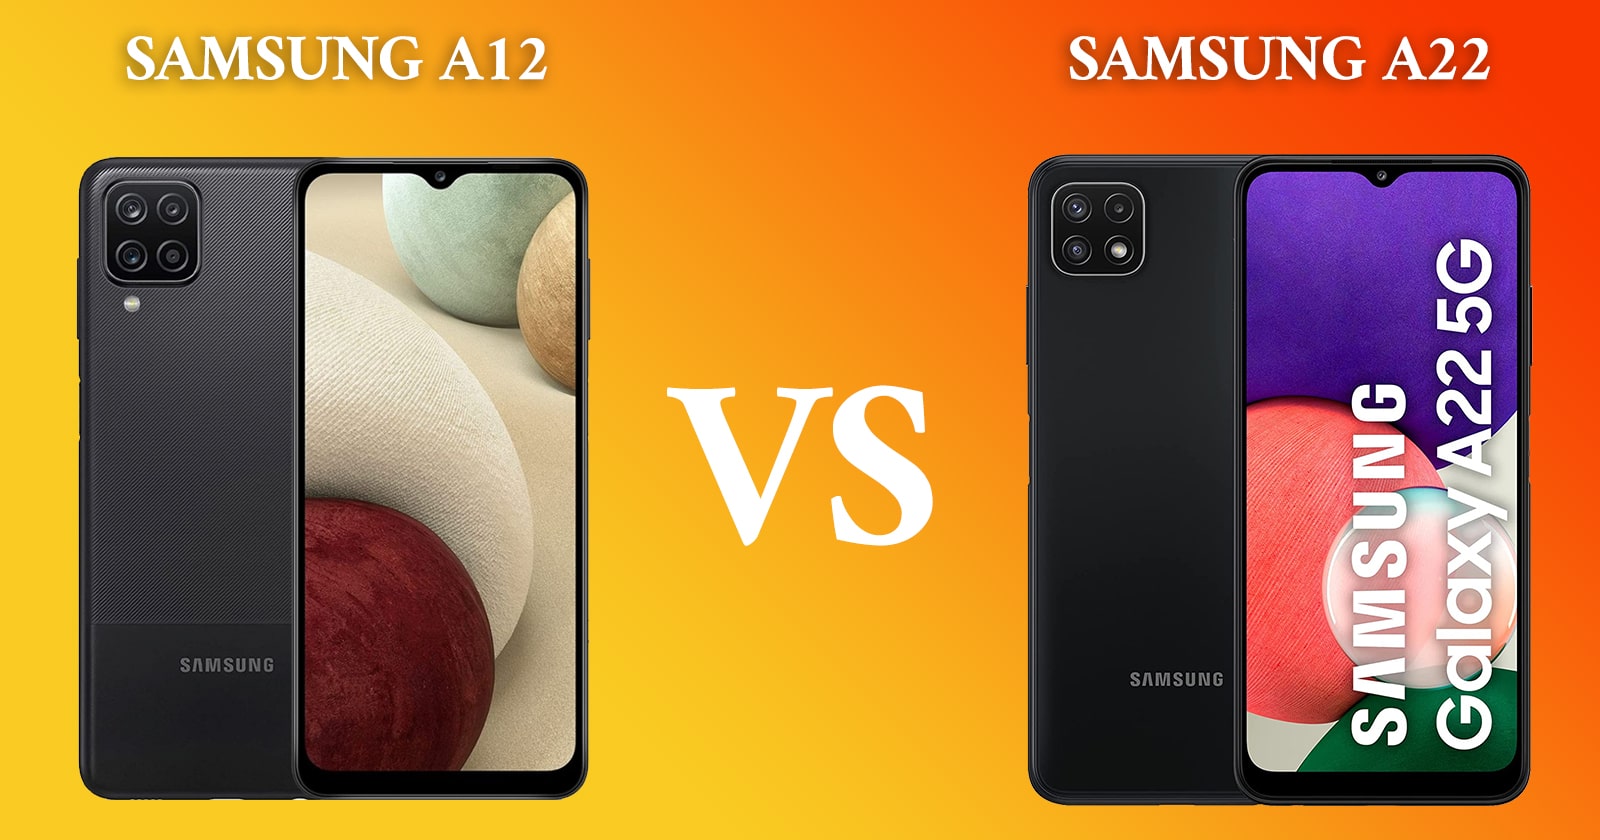 What Is the Difference Between Samsung A12 and A22